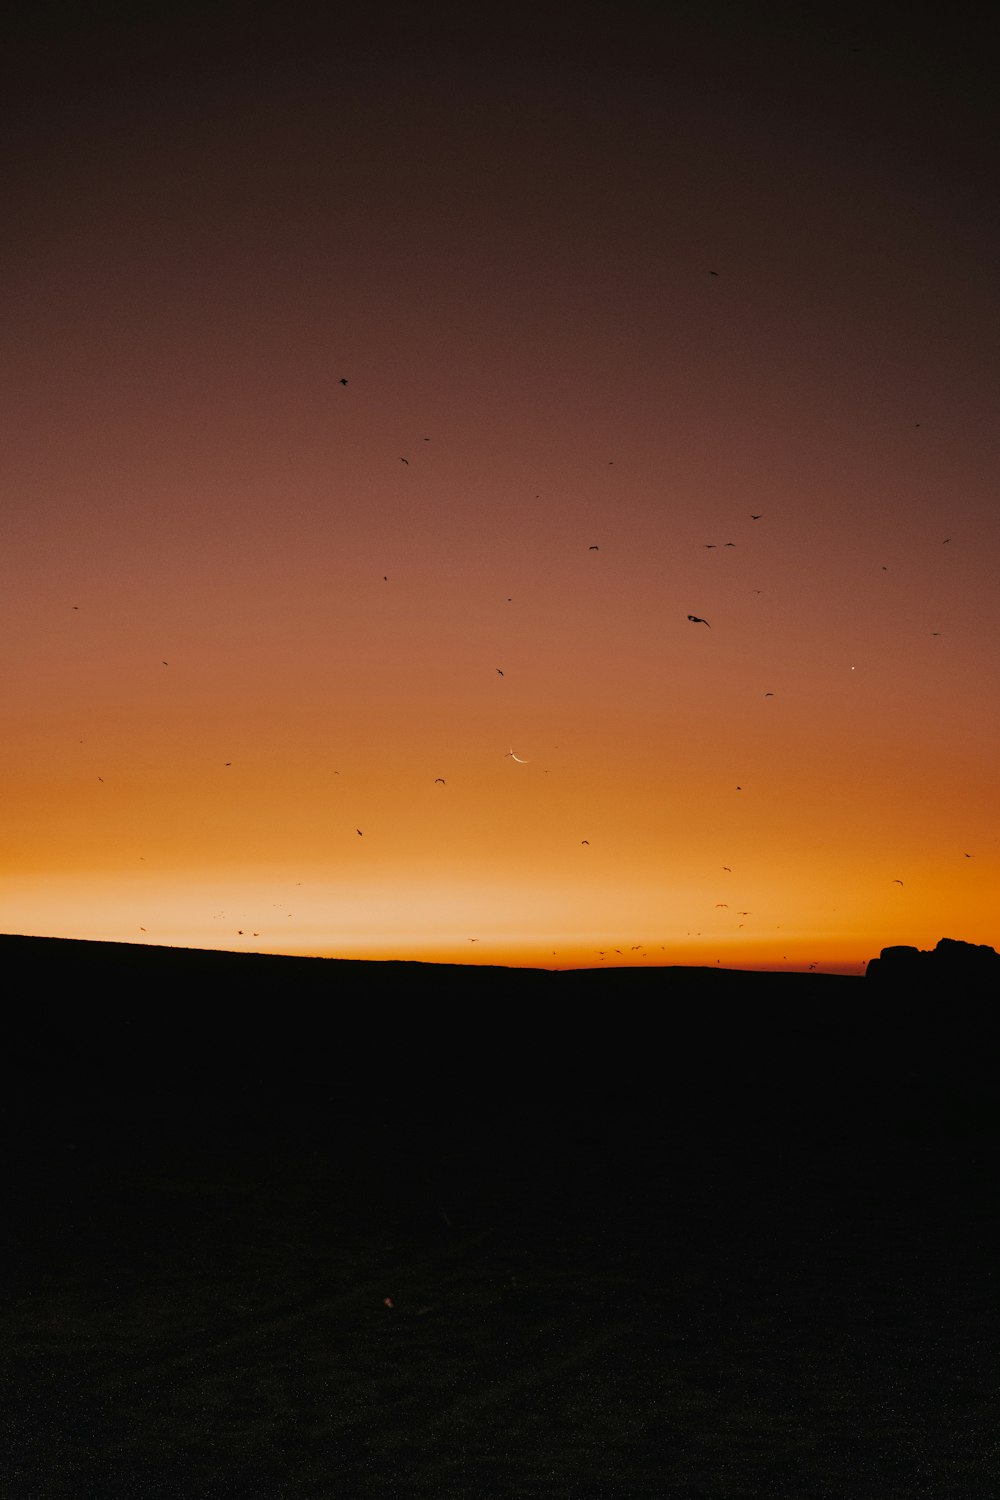 a sunset view of a field with birds flying in the sky